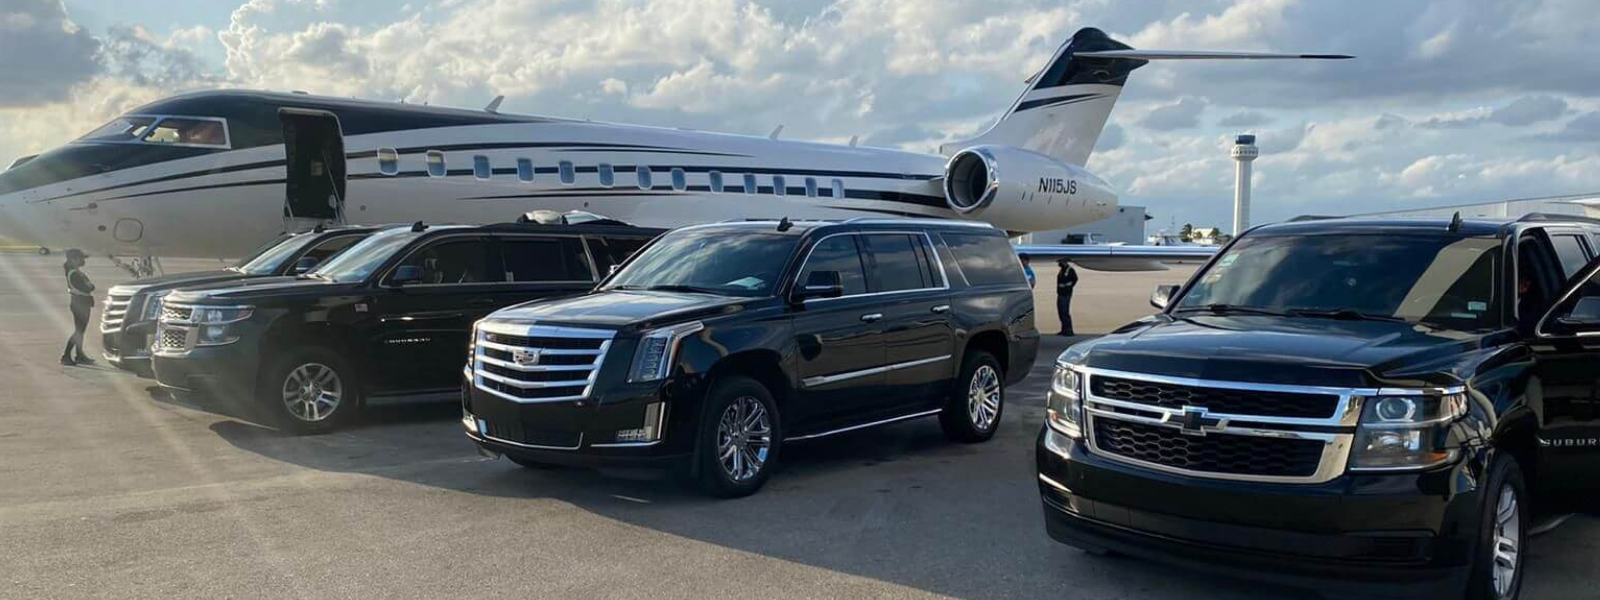 Fort Lauderdale Airport limo Service ✅Limo Fort Lauderdale Airport ✅Limo Service Fort Lauderdale airport free Airport Meet & Greet Service MIA,Fort Lauderdale airport to miami, Fort Lauderdale to south beach, Fort Lauderdale to Miami beach, Fort Lauderdale Airport Limousine Services Limo Service Fort Lauderdale Airport to South BeachLimo Service Fort Lauderdale Airport To Fort Lauderdale Hotels Limo Service Fort Lauderdale Airport To Fort Lauderdale BeachLimo Service Fort Lauderdale Airport To Sunny Isles Limo Service Fort Lauderdale Airport To Fort Lauderdale Limousine Service Fort Lauderdale Airport To Boca Raton Limo Service Fort Lauderdale Airport To West Palm Beach Limo Service Fort Lauderdale Airport To Key WestLimo Service Fort Lauderdale Airport To Orlando Limo Service Fort Lauderdale Airport To Naples Limo Service Fort Lauderdale Airport To Fort MyersLimo Service From Fort Lauderdale Airport To Tampa Limo Service From Fort Lauderdale Airport to Cruise Ports Limo Service Fort Lauderdale Airport To Port Fort Lauderdale Limo Service Fort Lauderdale Airport To Port EvergladesLimo Service Fort Lauderdale Airport To Port Canaveral, Fort Lauderdale airport limousine services, Fort Lauderdale airport limo services, limo service Fort Lauderdale airport, limo Fort Lauderdale airport, Fort Lauderdale airport limo service, Fort Lauderdale airport limo, Fort Lauderdale limo service from airportFort Lauderdale limo service airport, limo service from Fort Lauderdale airport, Fort Lauderdale airport limousine service, limousine service Fort Lauderdale airportlimo service Fort Lauderdale international airport, airport limo service Fort Lauderdalelimo service to Fort Lauderdale airport, airport limo Fort Lauderdale, Fort Lauderdale international airport limo service, mia limo, limousine Fort Lauderdale airport, Fort Lauderdale airport limo transfers, Fort Lauderdale airport limo transportation, limo ride to Fort Lauderdale airport, limos services Fort Lauderdale Airport, Fort Lauderdale Airport limo rates, limo rental Fort Lauderdale prices, Limo Fort Lauderdale Airport to Fort Lauderdale beach, Limo Fort Lauderdale Airport to South BeachLimo Fort Lauderdale airport to beach, Limo Fort Lauderdale Airport to Port Fort Lauderdale, Limo Fort Lauderdale Airport to Sunny isles, Limo Fort Lauderdale Airport to Fort Lauderdale, Limo Fort Lauderdale Airport to Pampona Beach, Limo Fort Lauderdale Airport to Boyton Beach, Limo Fort Lauderdale Airport to Boca Raton, Limo Fort Lauderdale Airport to Palm Beach, limo Fort Lauderdale Airport to Jupiter, Limo Fort Lauderdale Airport to Vero beach, Limo Fort Lauderdale Airport to Orlando, Limo Fort Lauderdale Airport to Tampa, Limo Fort Lauderdale Airport to Naples, Limo Fort Lauderdale Airport to Marco island, Limo Fort Lauderdale Airport to Sarasota, Limo Fort Lauderdale Airport to Sanibel, Limo Fort Lauderdale Airport to Venice, Limo, Fort Lauderdale Airport to Cape Coral, Limo Fort Lauderdale Airport to key Largo, Limo Fort Lauderdale Airport to Islamorada, Limo Fort Lauderdale Airport to Key west, from Fort Lauderdale Beach to Fort Lauderdale Airport, Limo South Beach to Fort Lauderdale Airport, Limo South Beach to Fort Lauderdale Airport, Limo Port Fort Lauderdale to Fort Lauderdale Airport, Limo Sunny isles to Fort Lauderdale Airport, Limo Fort Lauderdale to Fort Lauderdale Airport, Limo Pampona Beach to Fort Lauderdale Airport, Limo Boyton Beach to Fort Lauderdale Airport, Limo Boca Raton to Fort Lauderdale Airport, Limo Palm Beach to Fort Lauderdale Airport, limo Jupiter to Fort Lauderdale Airport, Limo Vero beach to Fort Lauderdale Airport, Limo Orlando to Fort Lauderdale Airport, Limo Tampa to Fort Lauderdale Airport, Limo Naples to Fort Lauderdale Airport, Limo Marco island to Fort Lauderdale Airport, Limo Sarasota to Fort Lauderdale Airport, Limo Sanibel to Fort Lauderdale Airport, Limo Venice to Fort Lauderdale Airport, Limo Cape Coral to Fort Lauderdale Airport, Limo key Largoto Fort Lauderdale Airport, Limo Islamorada to Fort Lauderdale Airport, Limo Key west to Fort Lauderdale Airport